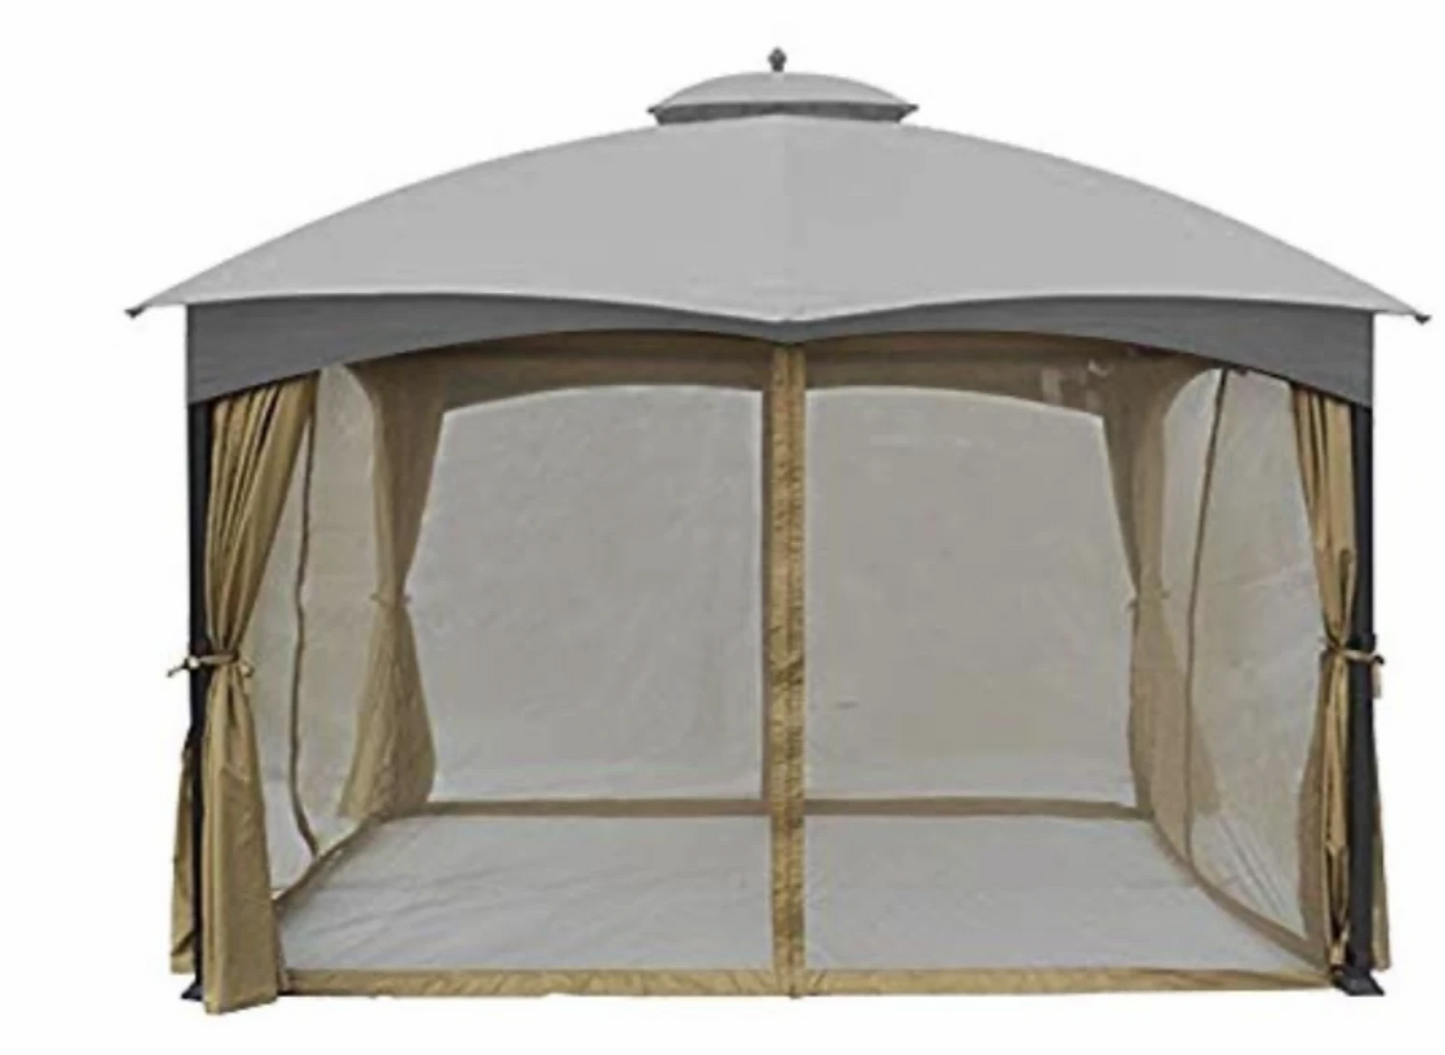 Lowes Allen and Roth 10 X 12 Gazebo Refresh Bundle Canopy,Bug Screen,Curtain All in one Package